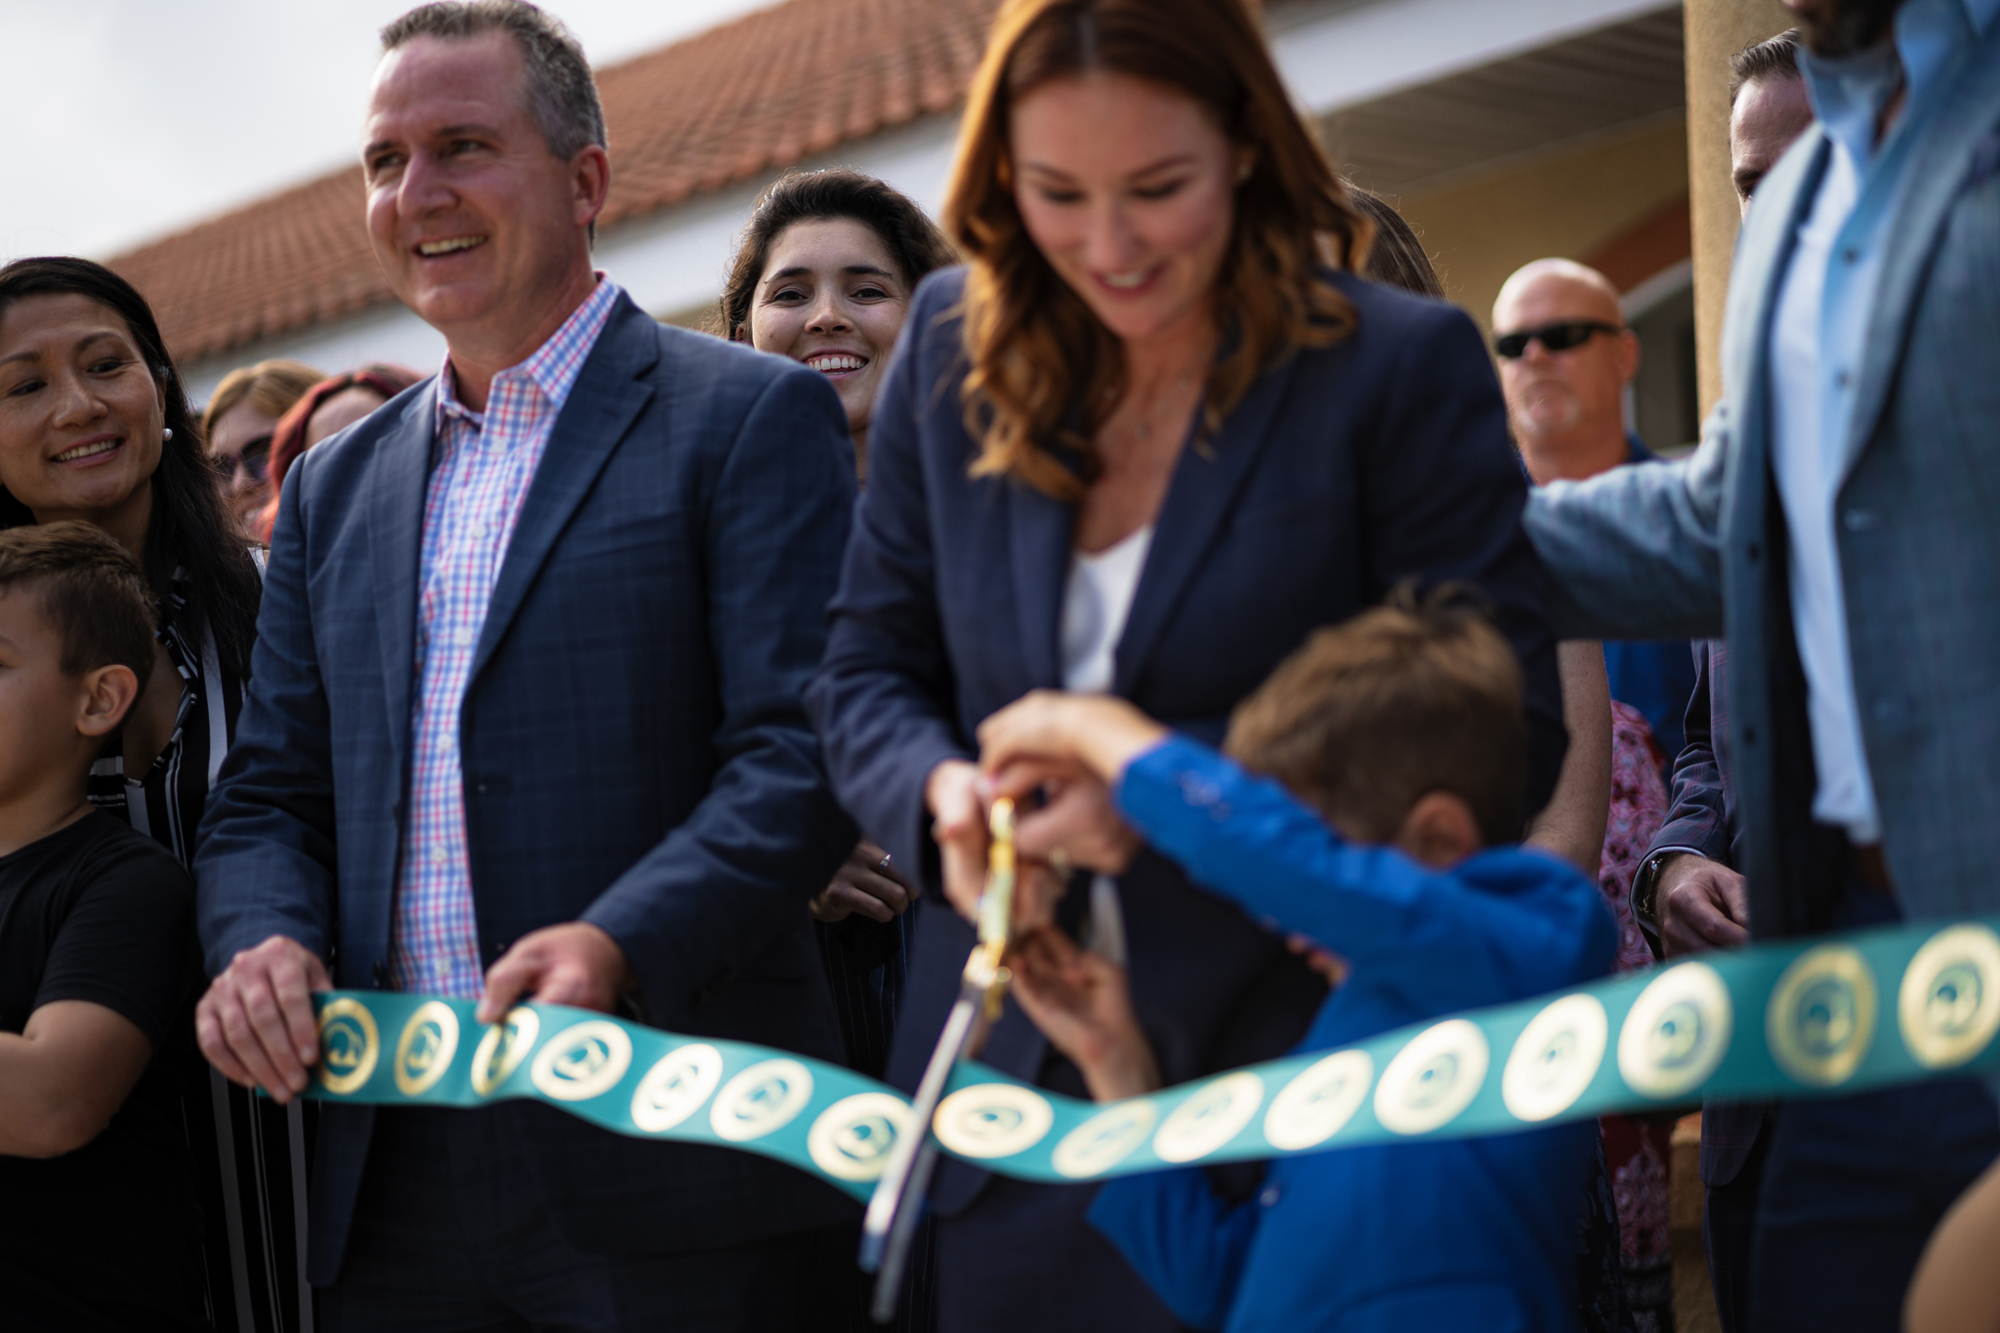 The ribbon-cutting ceremony at the new Ormond Beach Northwestern Mutual took place Nov. 3. Courtesy photo